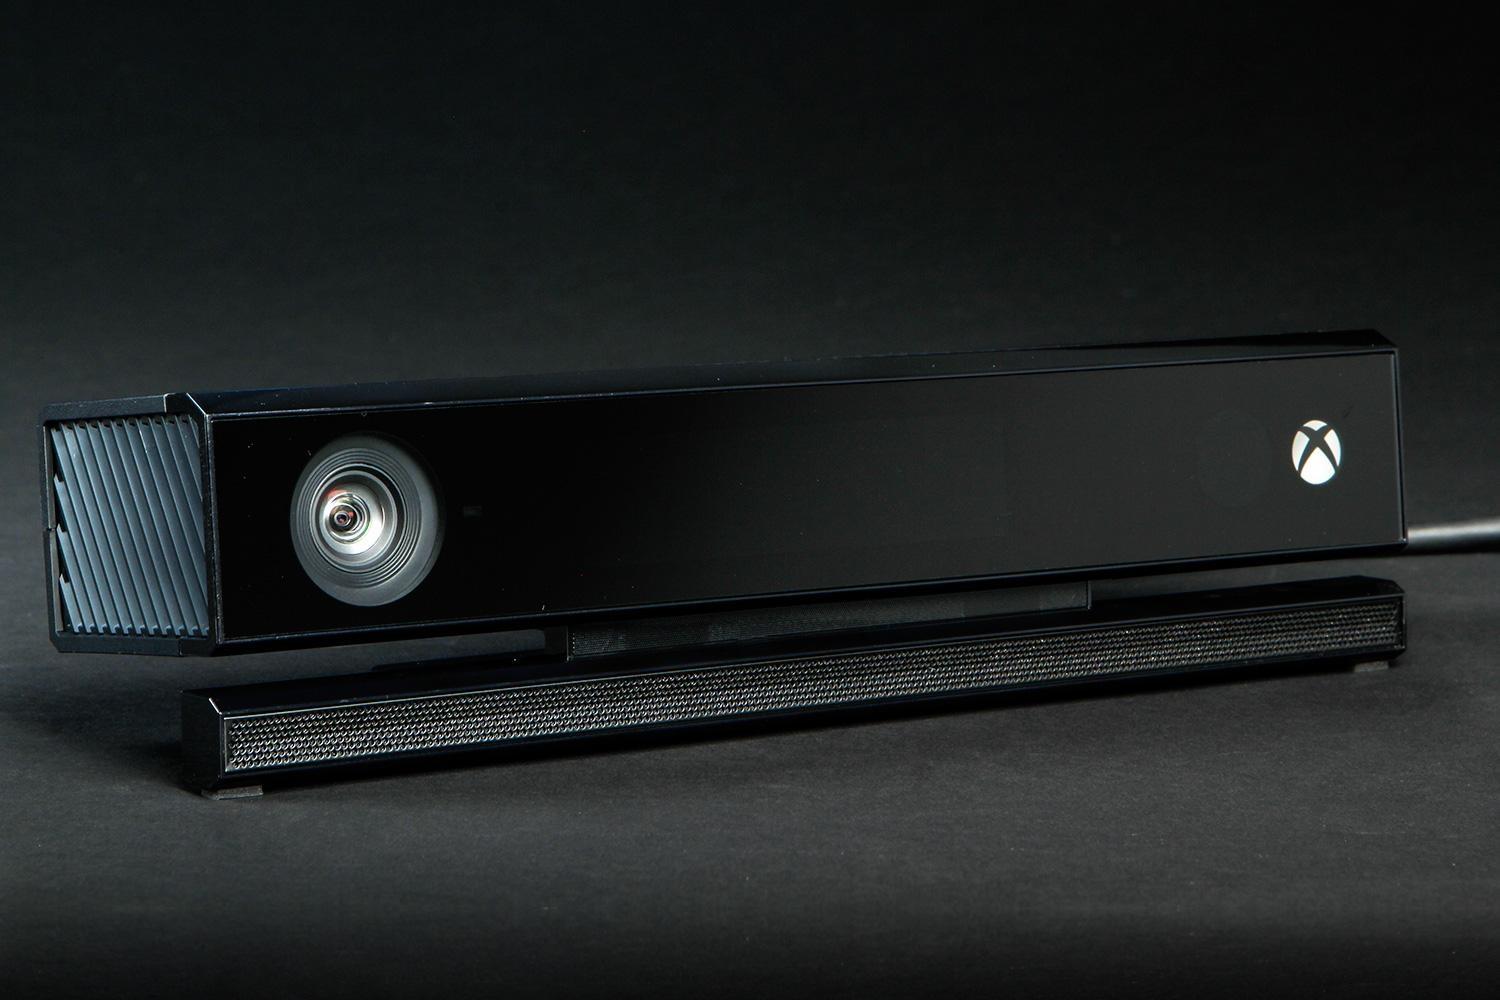 microsoft-xbox-one-review-console-kinect-angle-2-1500x1000